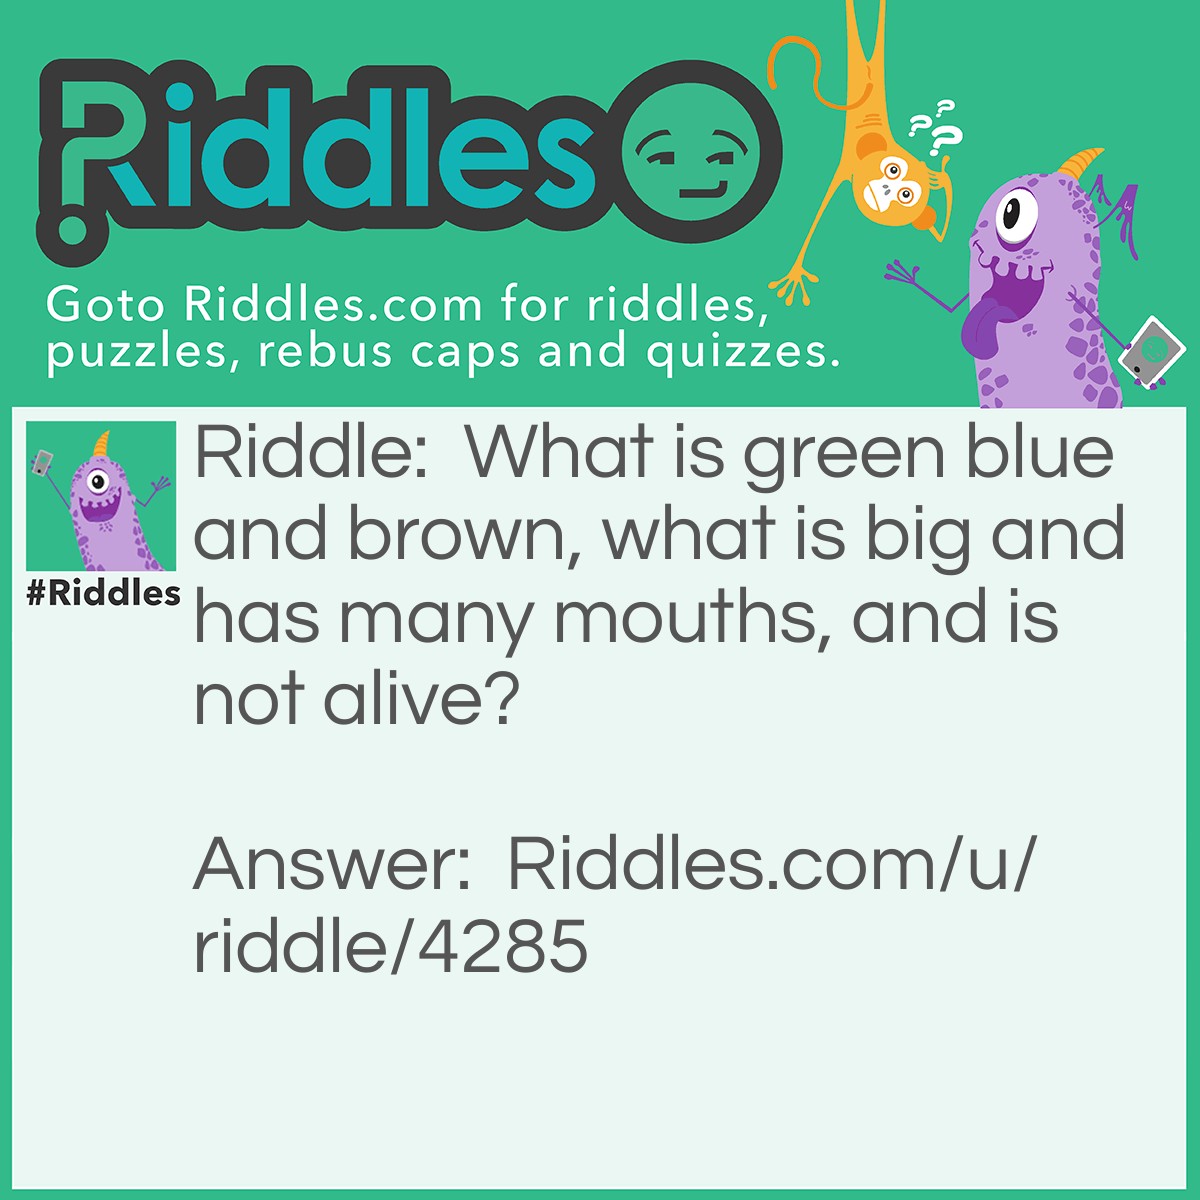 Riddle: What is green blue and brown, what is big and has many mouths, and is not alive? Answer: The earth.